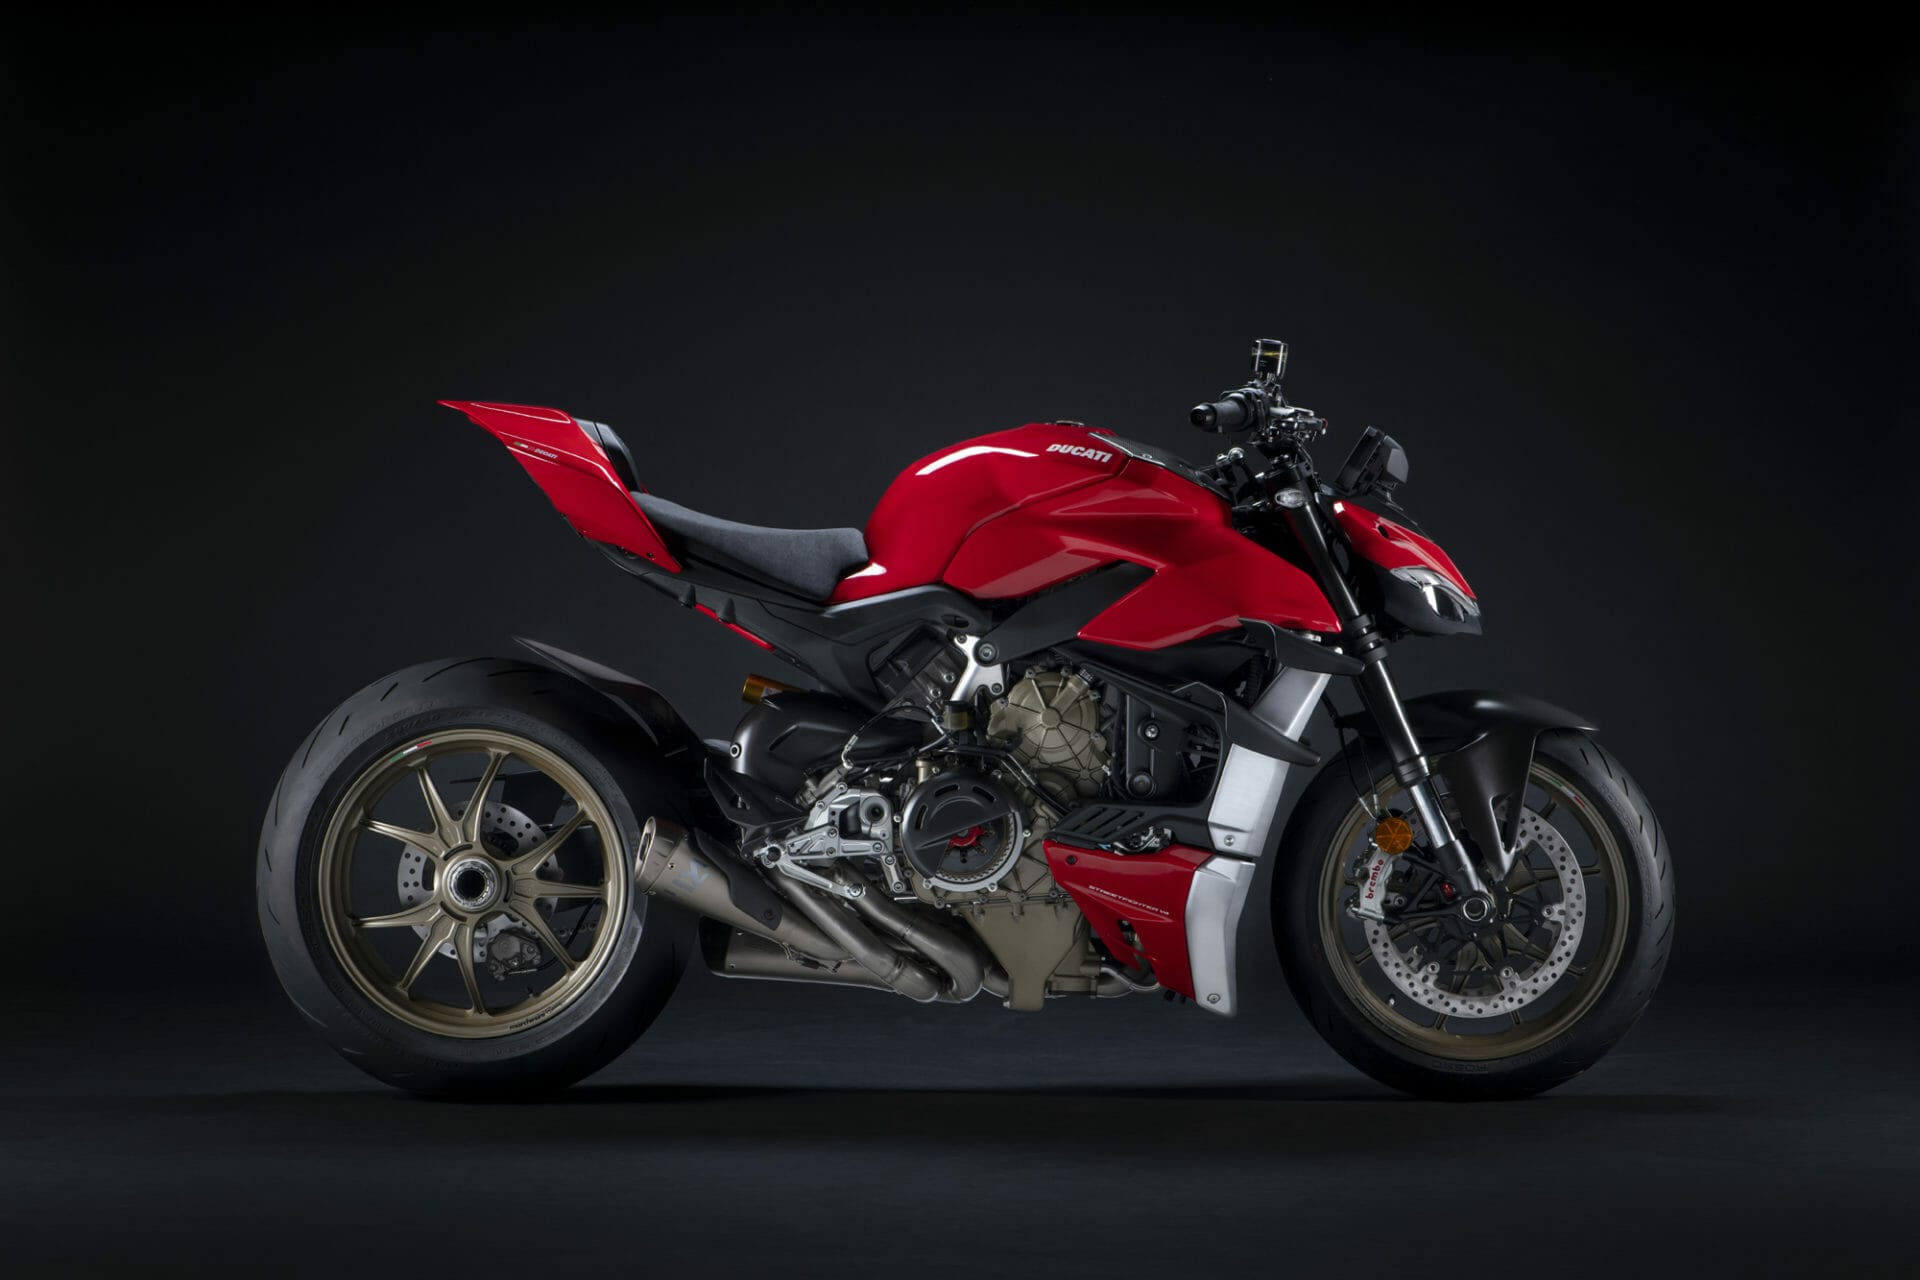 Ducati Streetfighter V4 Performance Accessories
- also in the App MOTORCYCLE NEWS